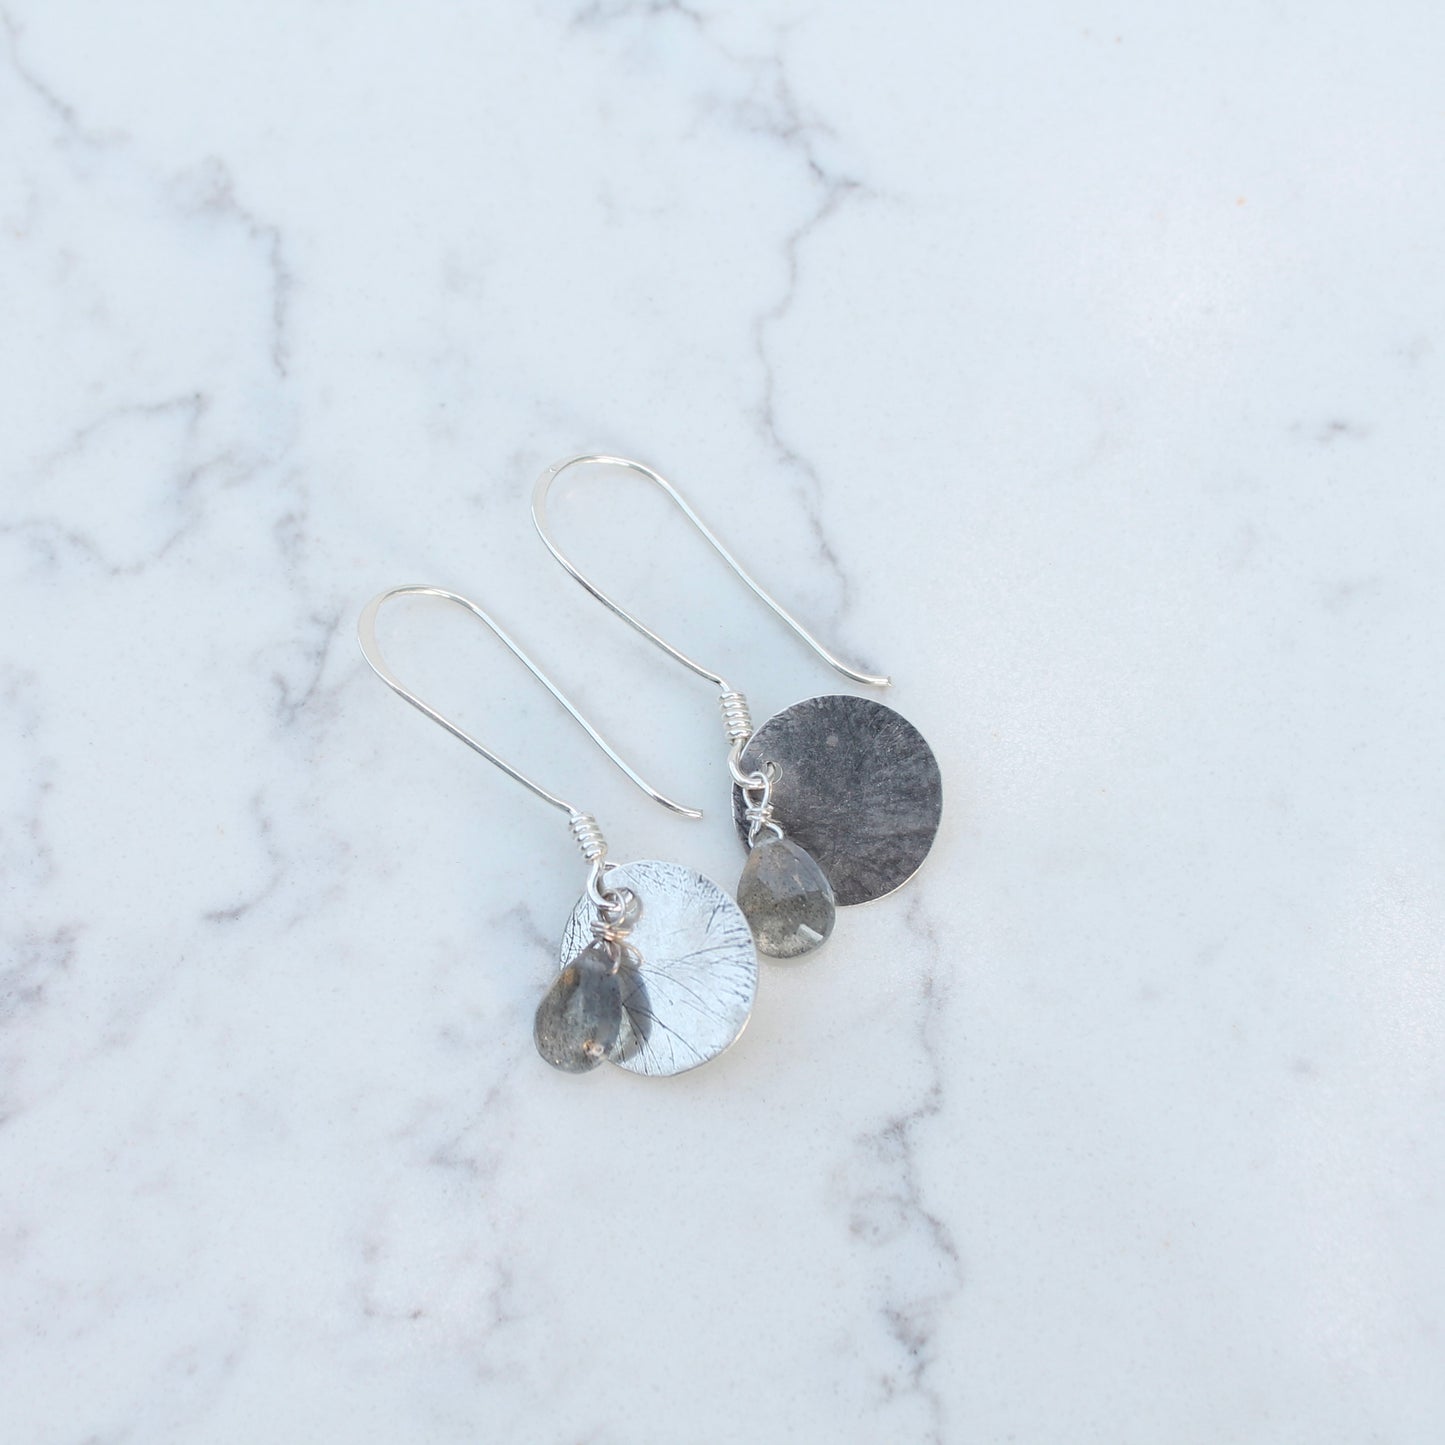 Labradorite Briolette with Brushed Silver Disk on Long Wires